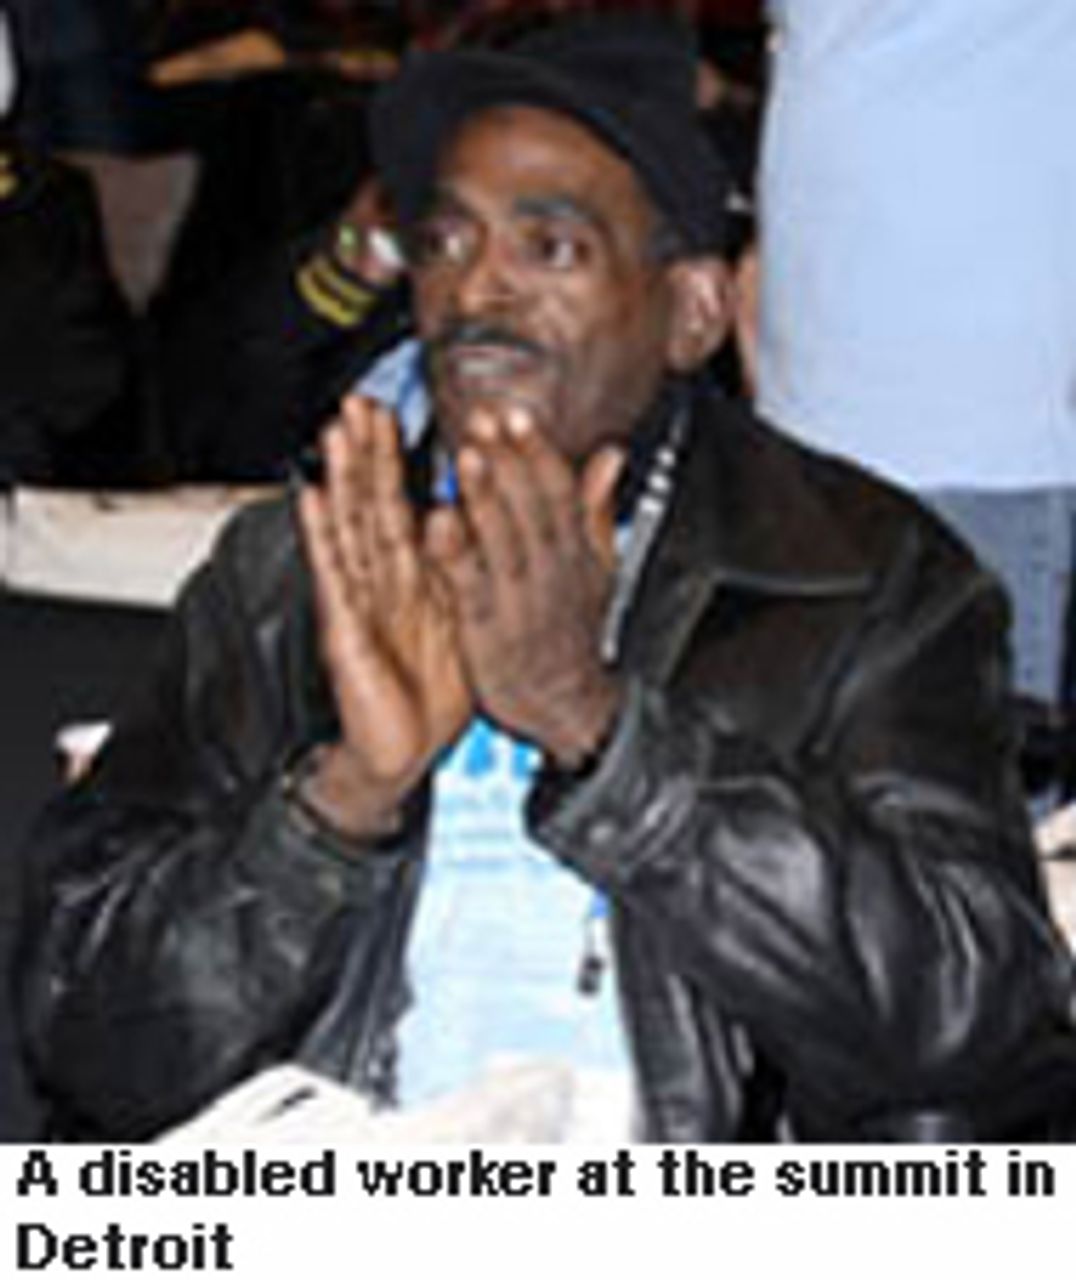 A disabled worker at the summit in Detroit